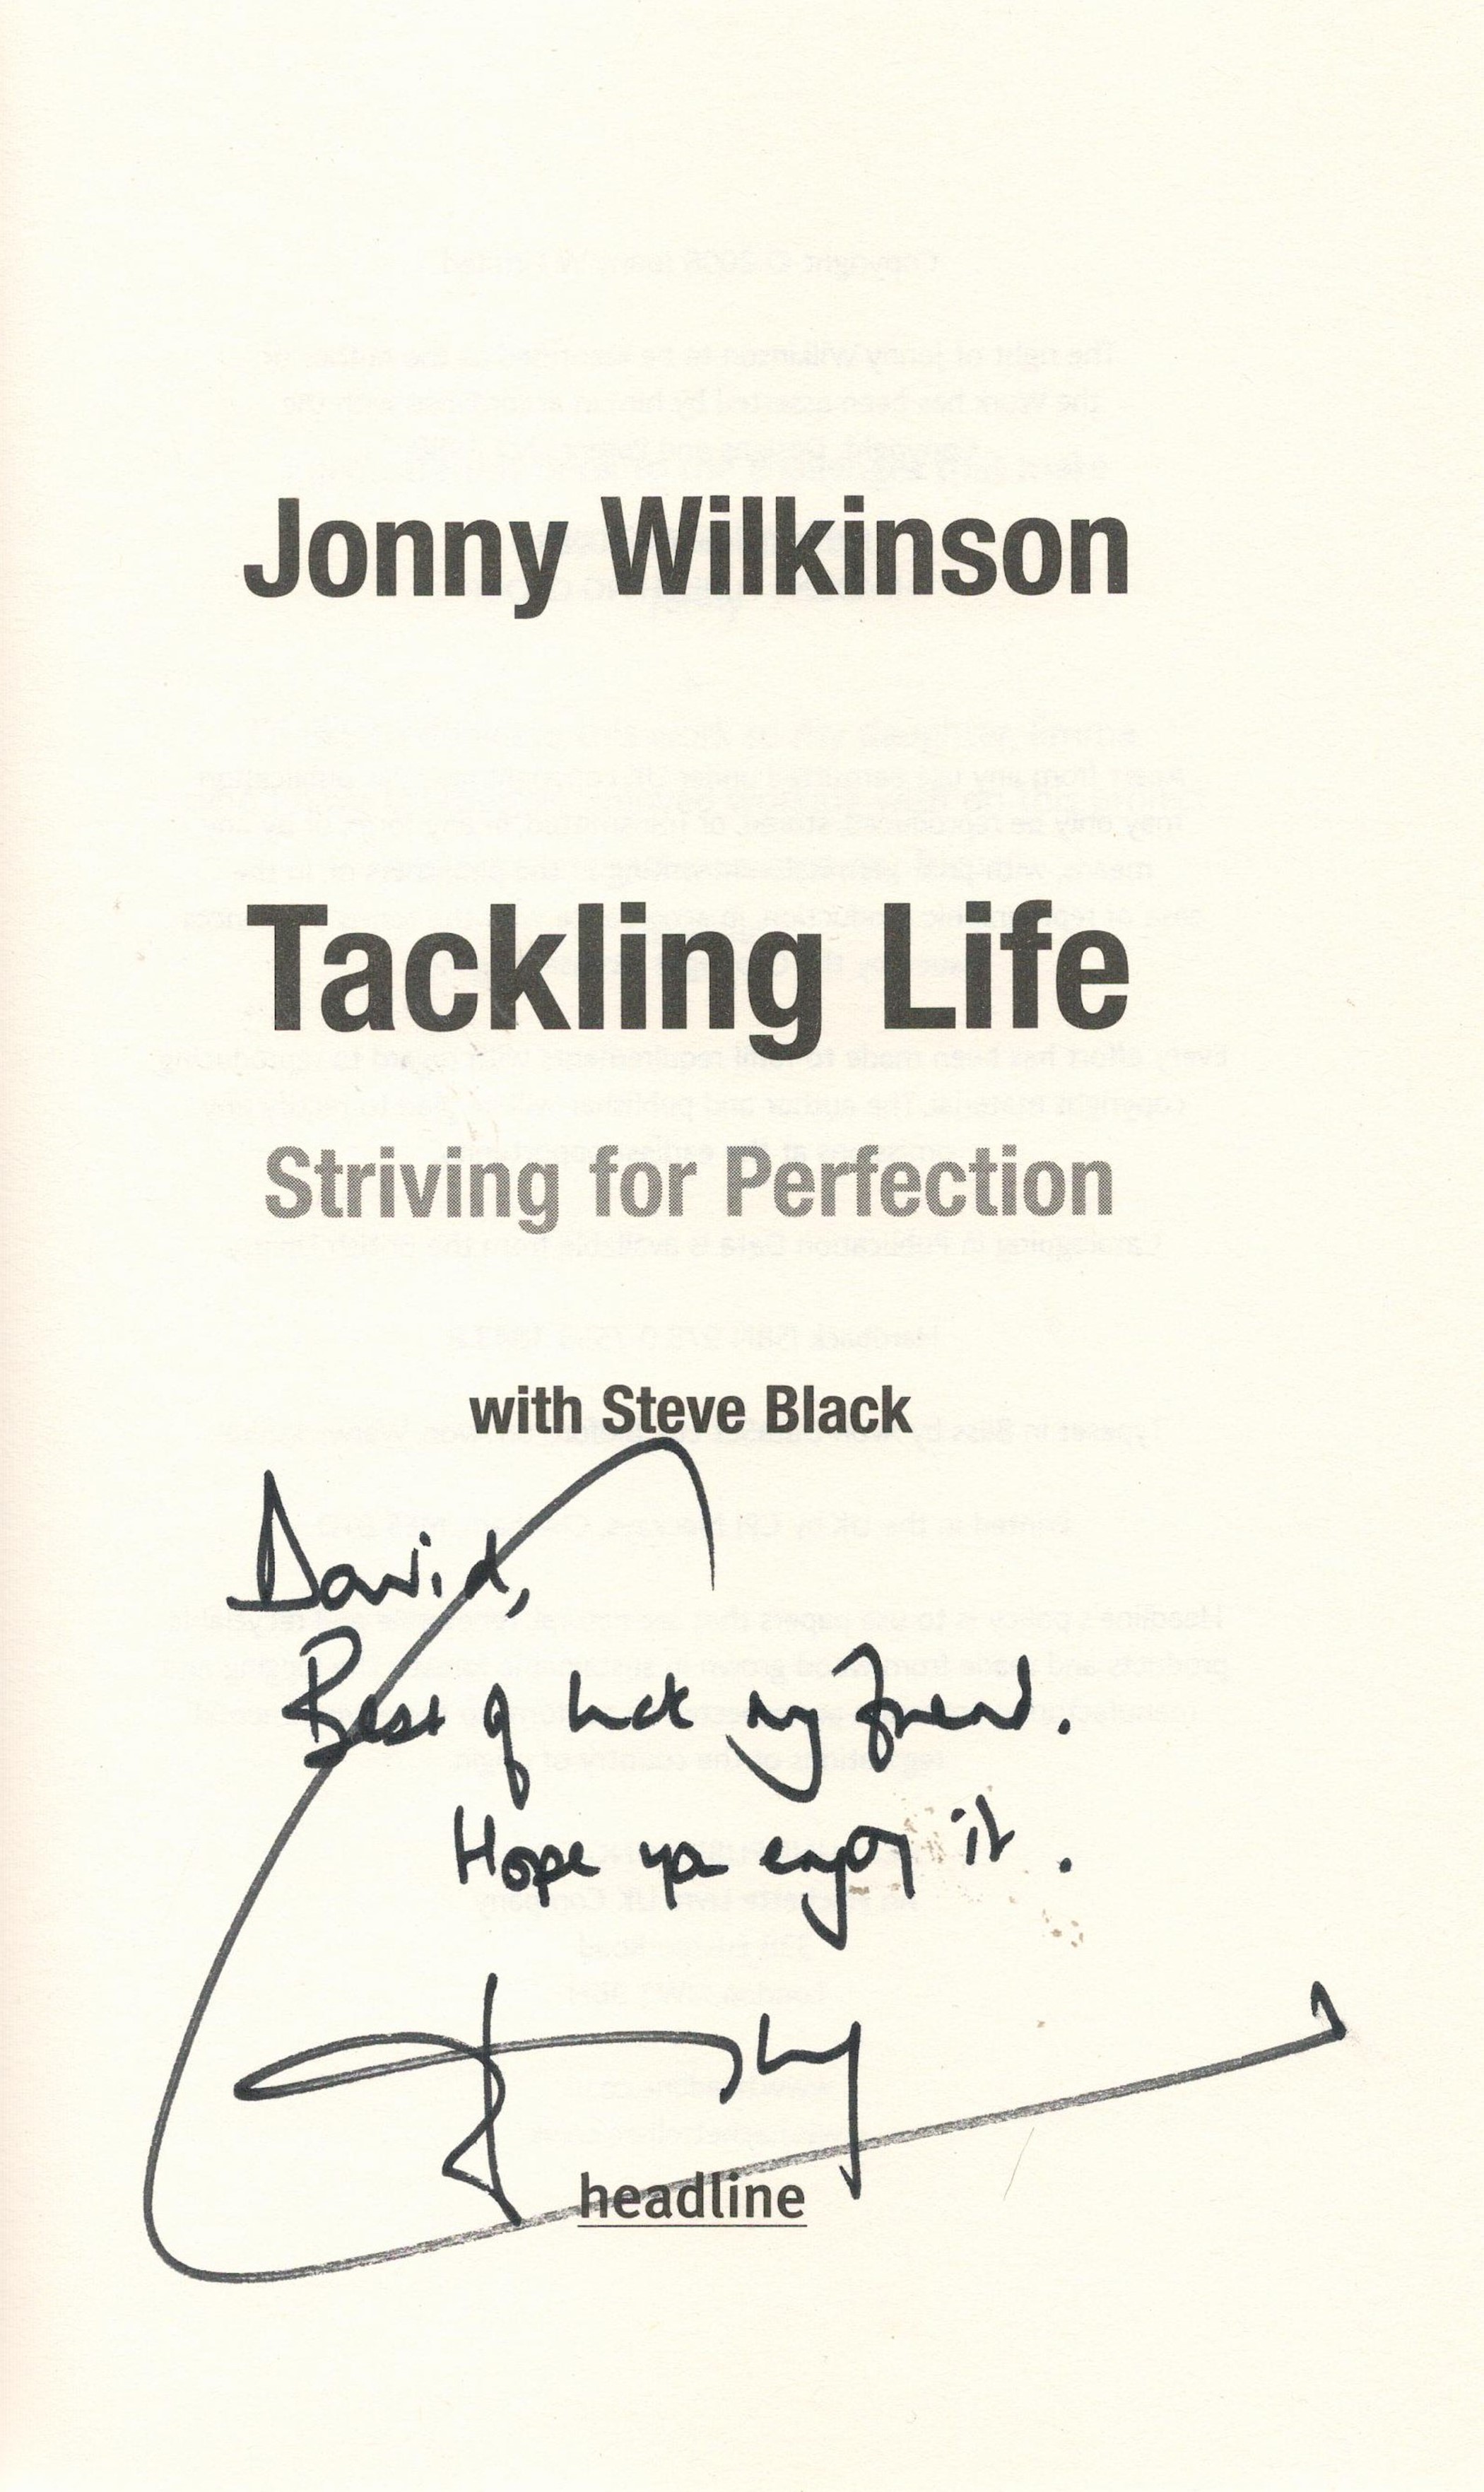 Signed Book Jonny Wilkinson Tackling Life Striving for Perfection First Edition 2008 Hardback Book - Image 3 of 4